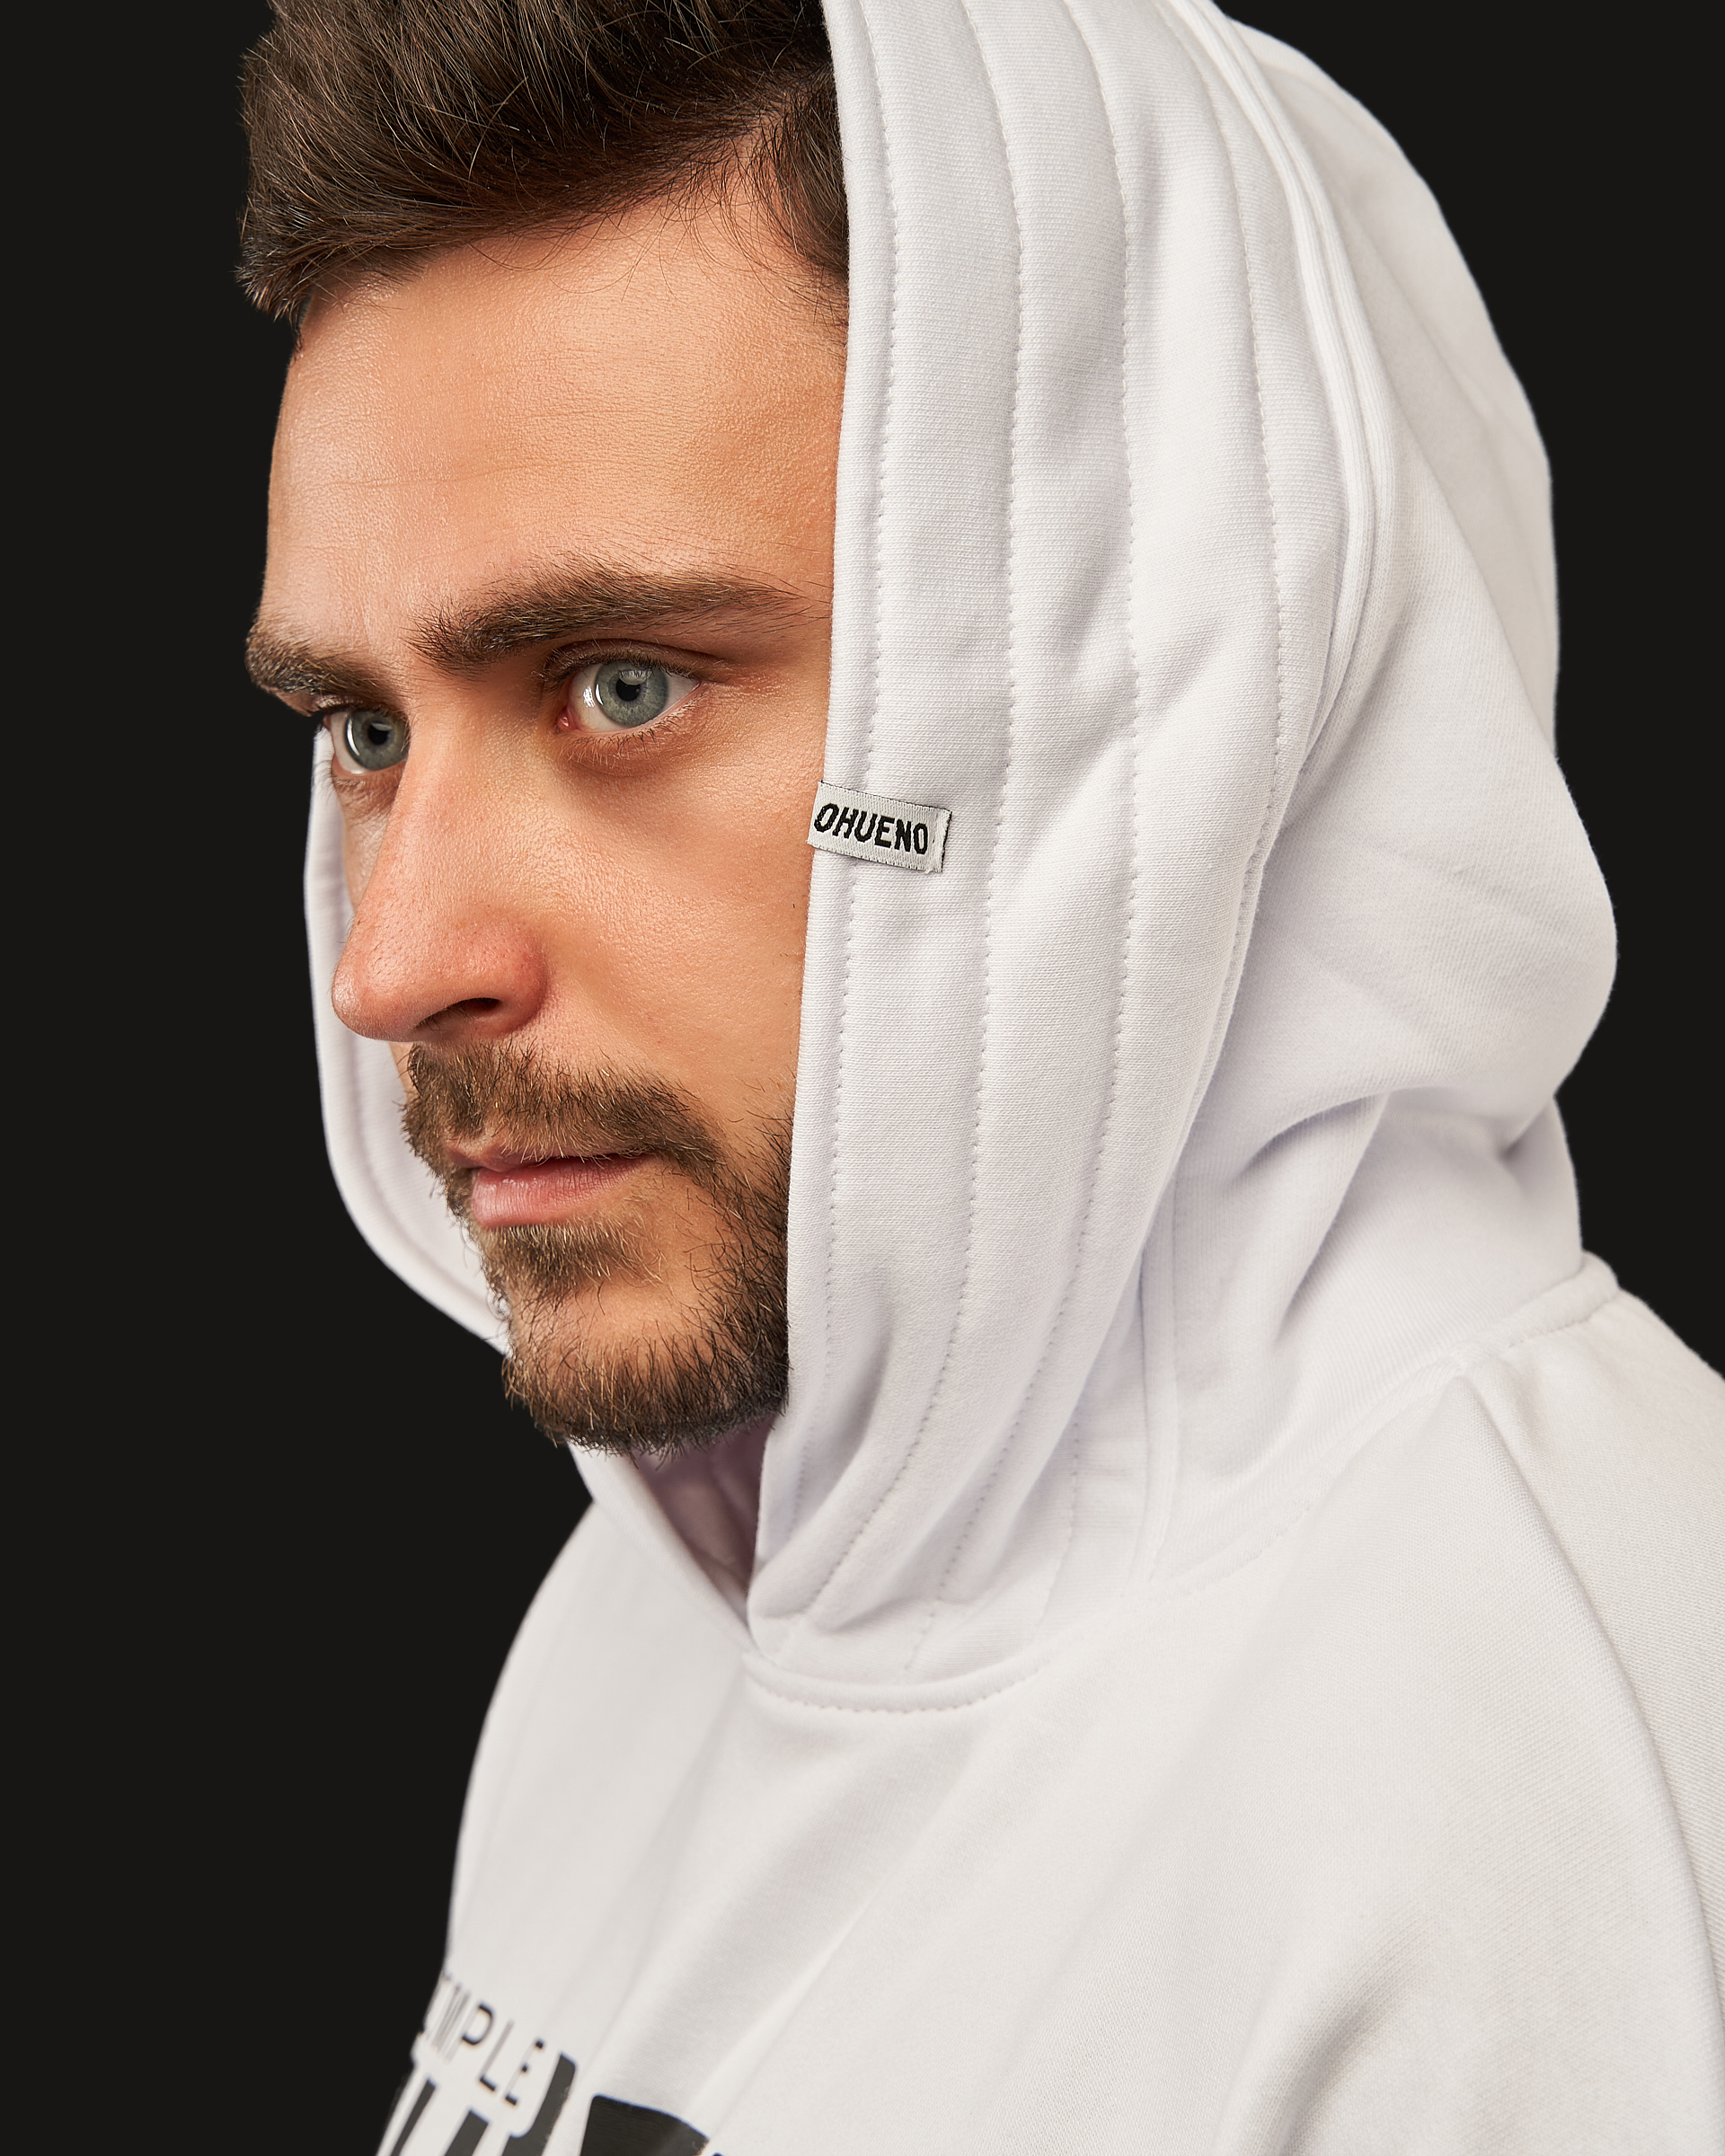 Oversized hoodie (white) Image: https://ohueno-official.com/wp-content/uploads/m01979.jpg